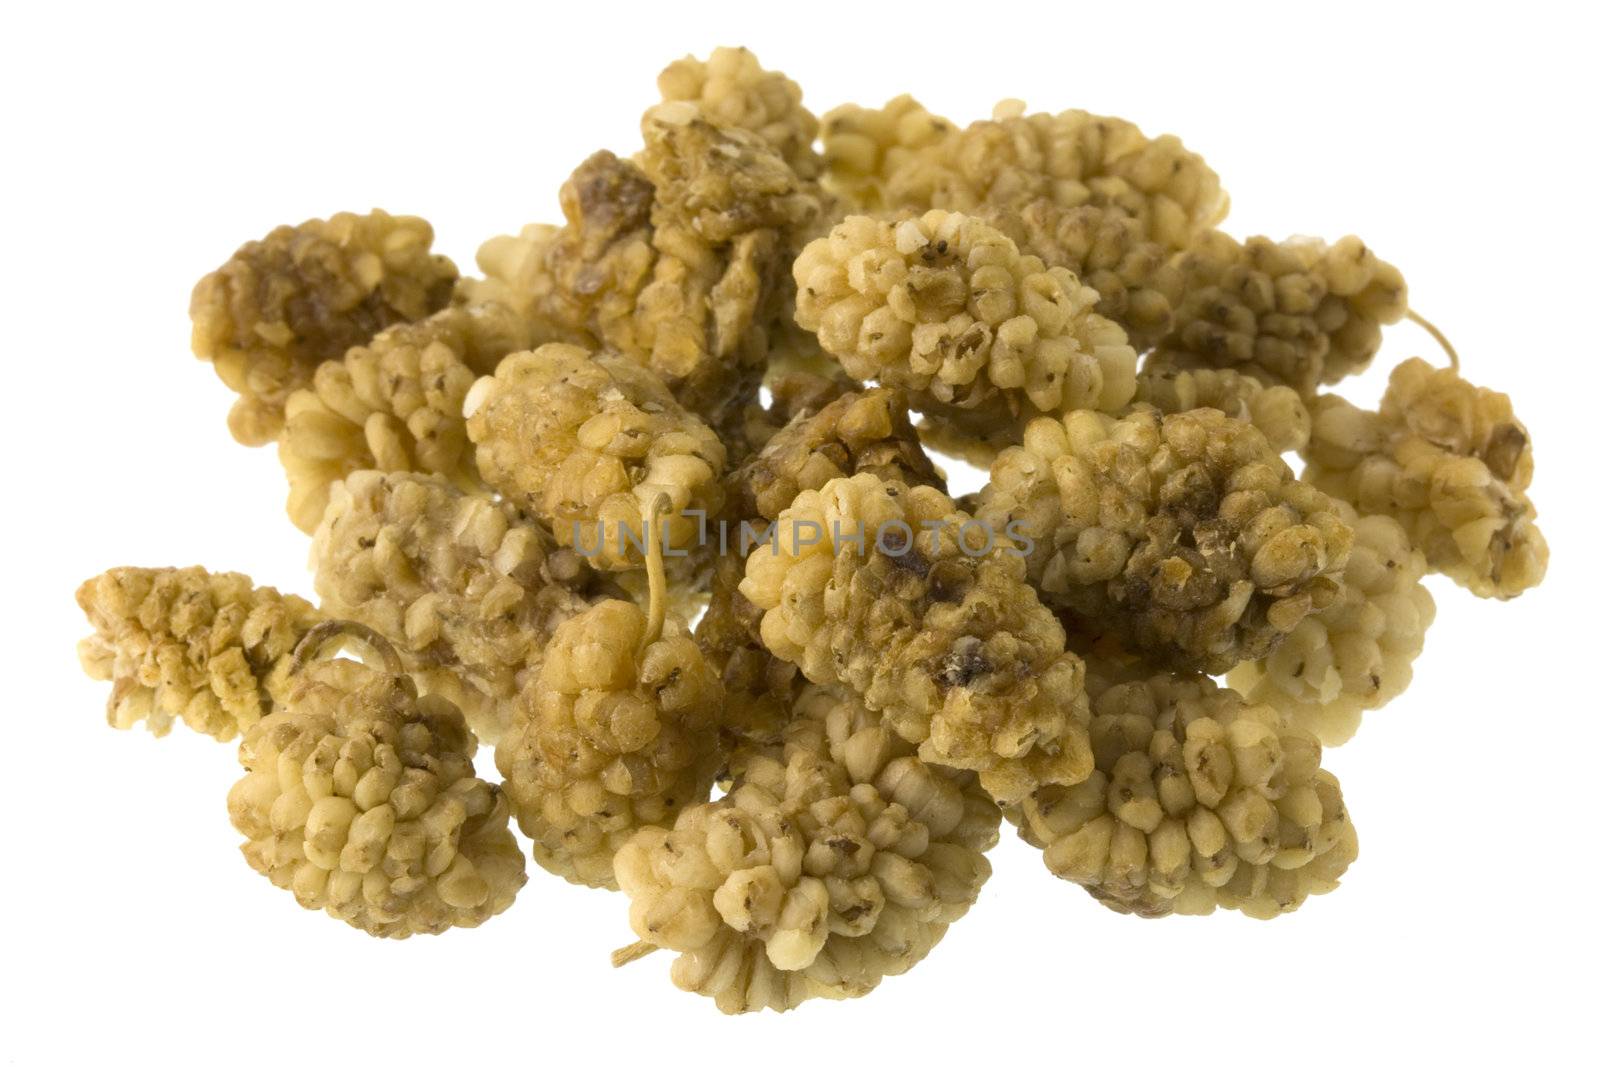 dried mulberry fruits on white by PixelsAway